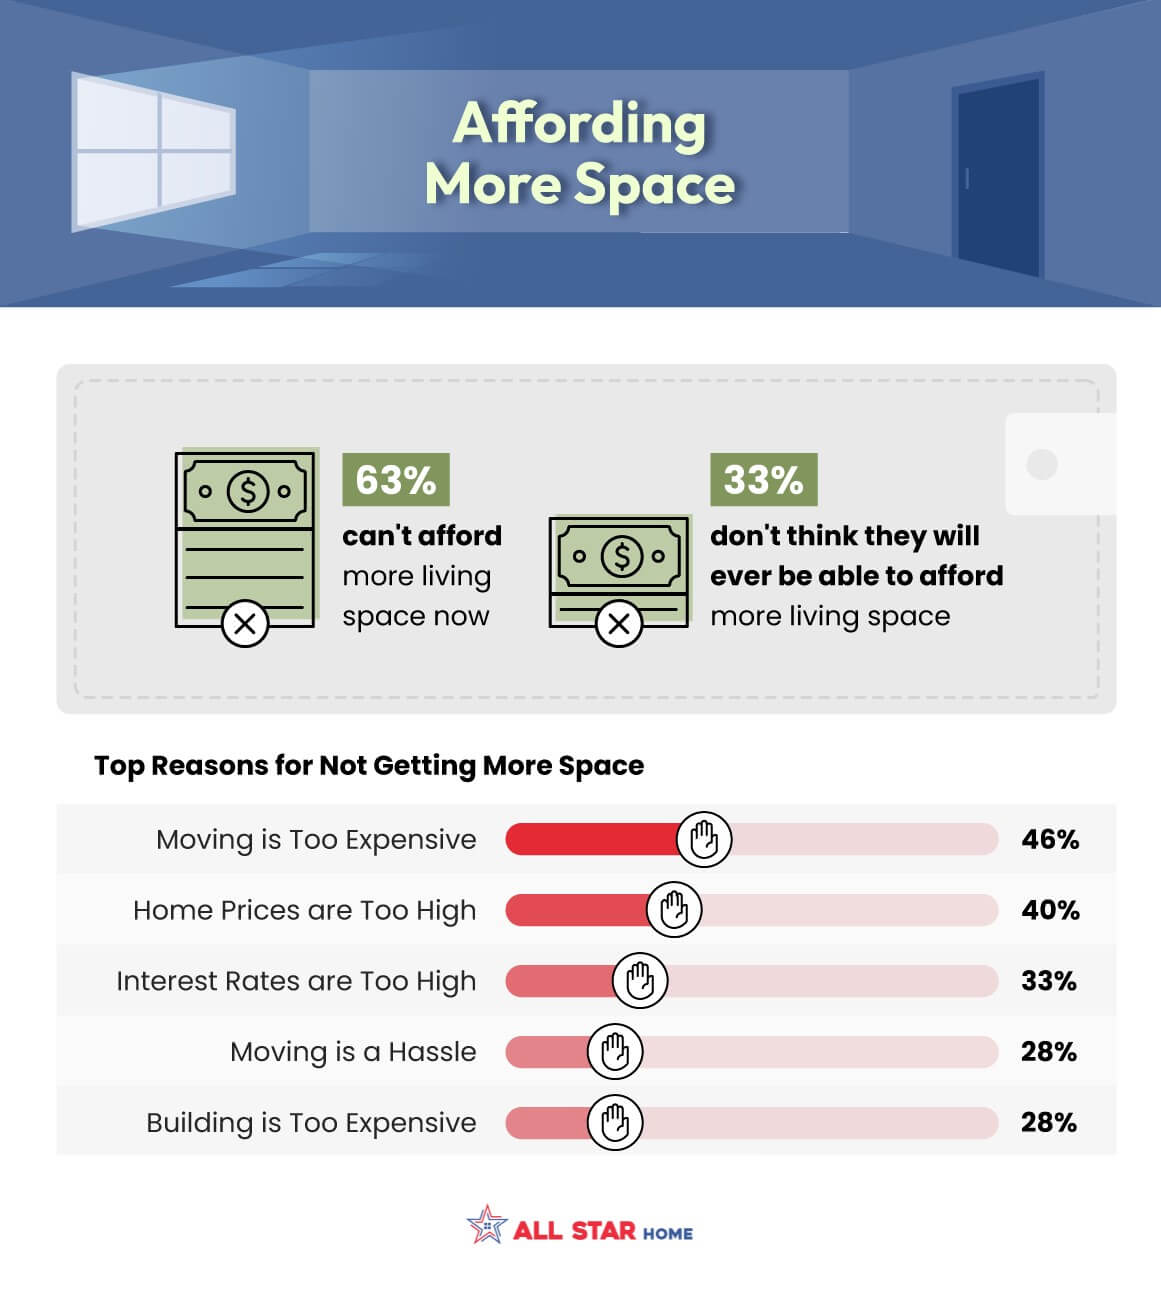 Top 5 reasons American homeowners aren’t moving to bigger homes - infographic from AllStarHome.com